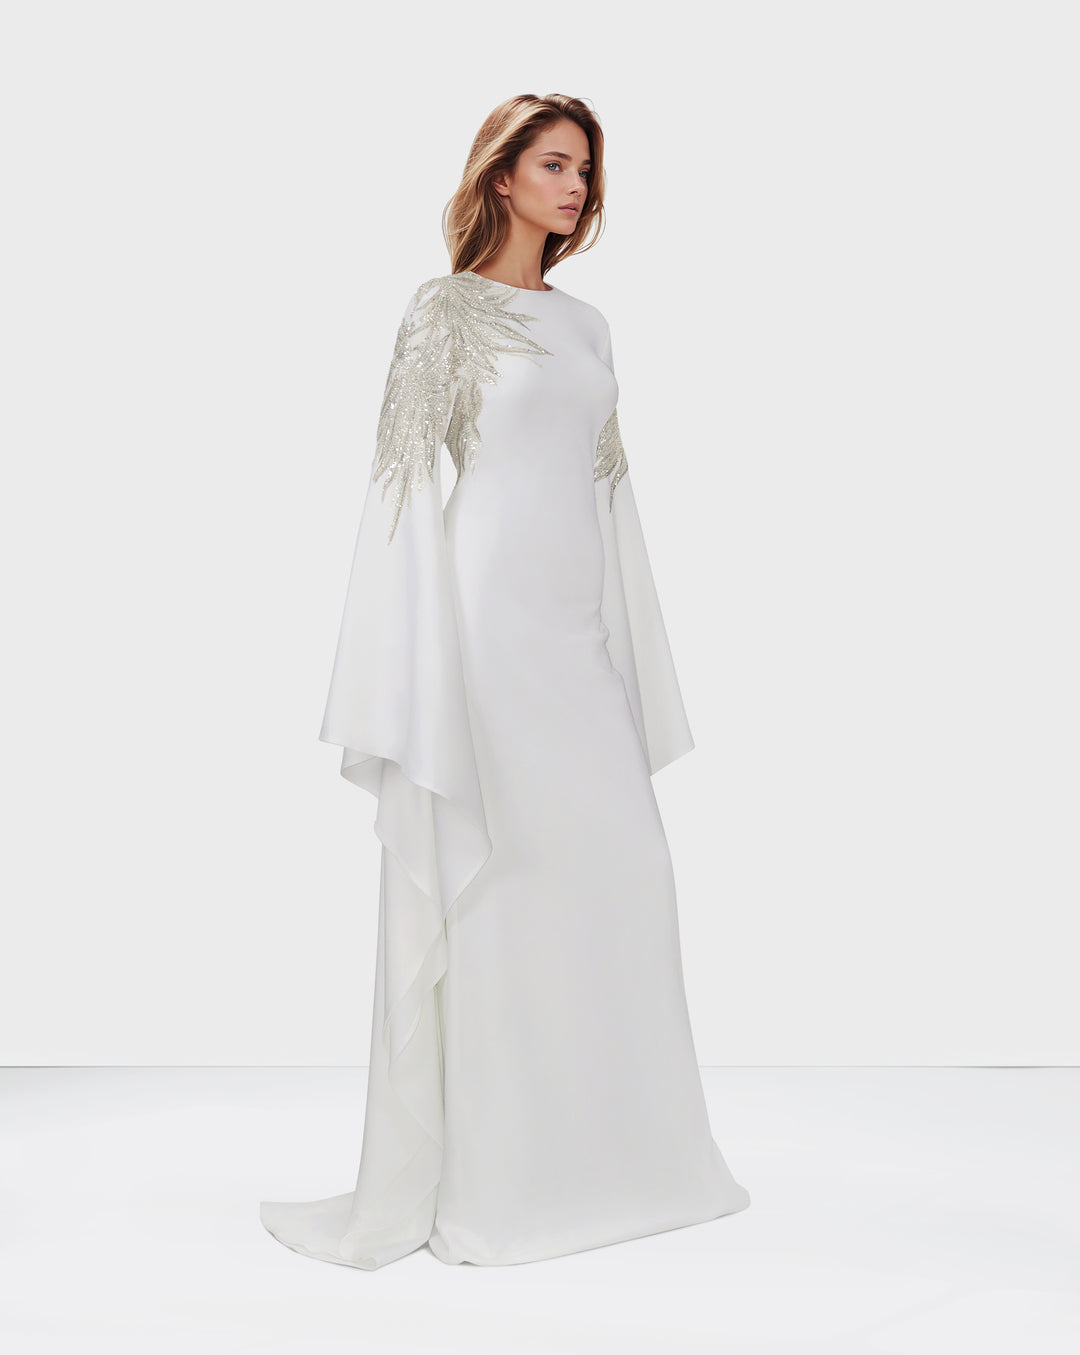 Sequined white dress with floor-length sleeves